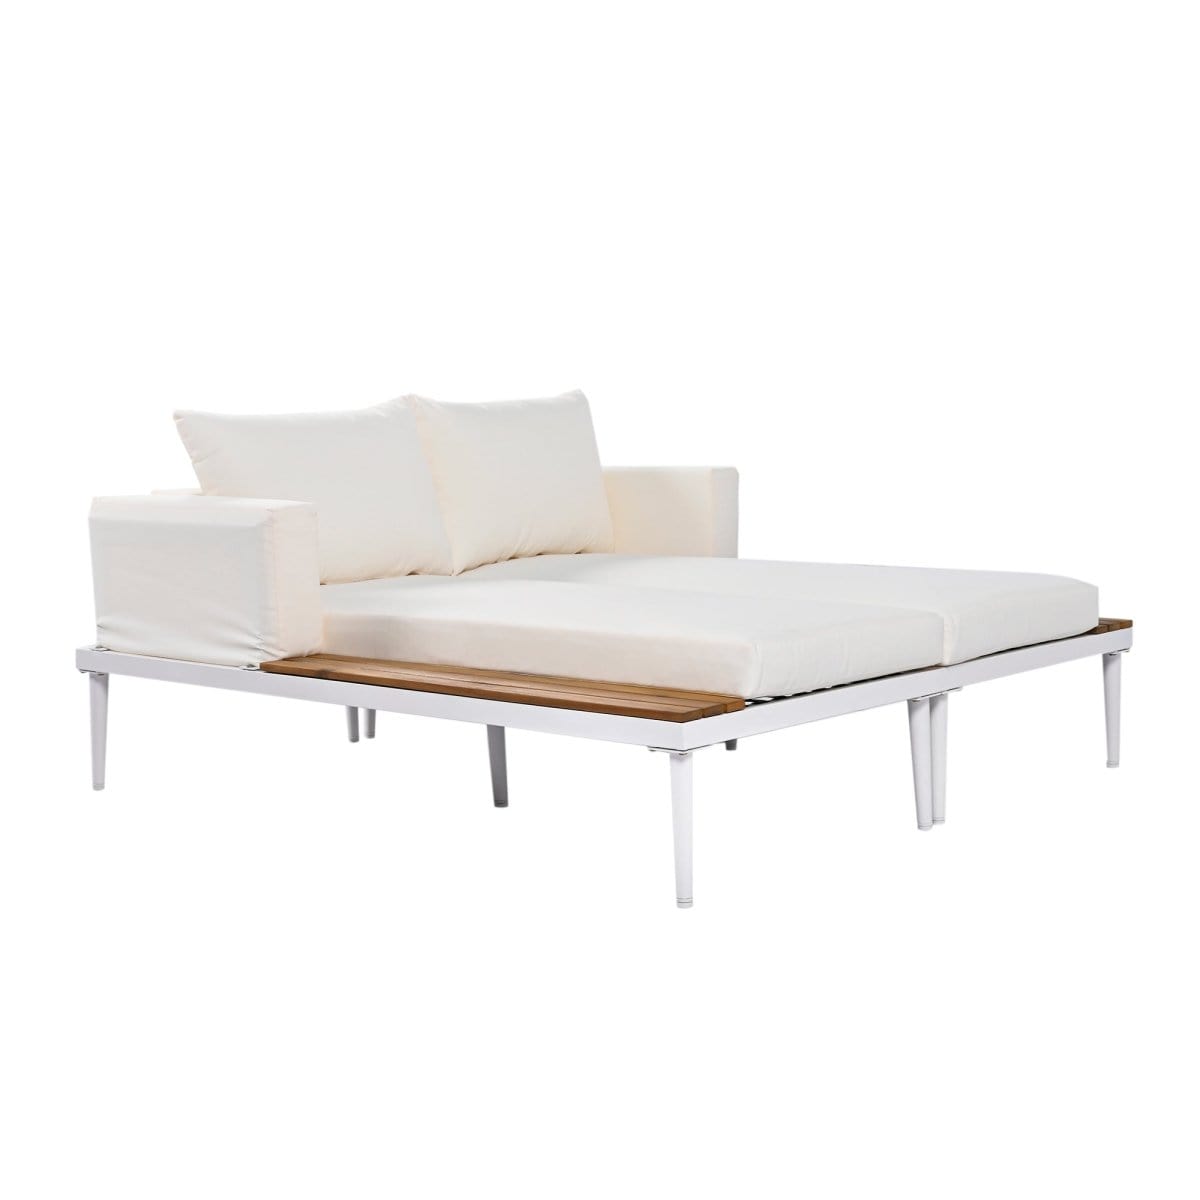 Modern Outdoor Daybed Sofa9Topmaxx